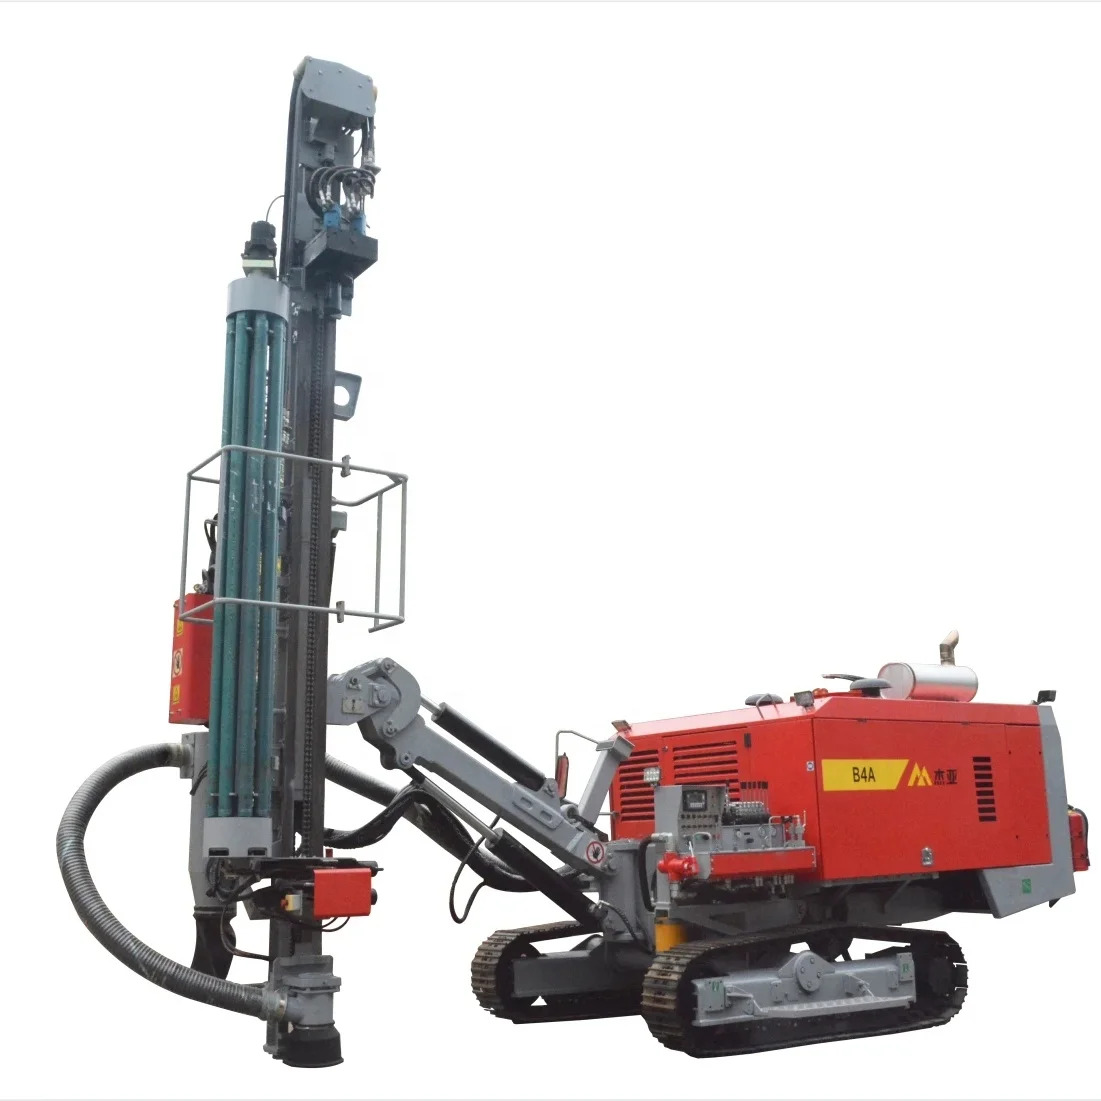 Hongwuhuan JIEA B4A   Fully hydraulic open 24m mine drilling rig submersible hole drilling machine with mobile air compressor